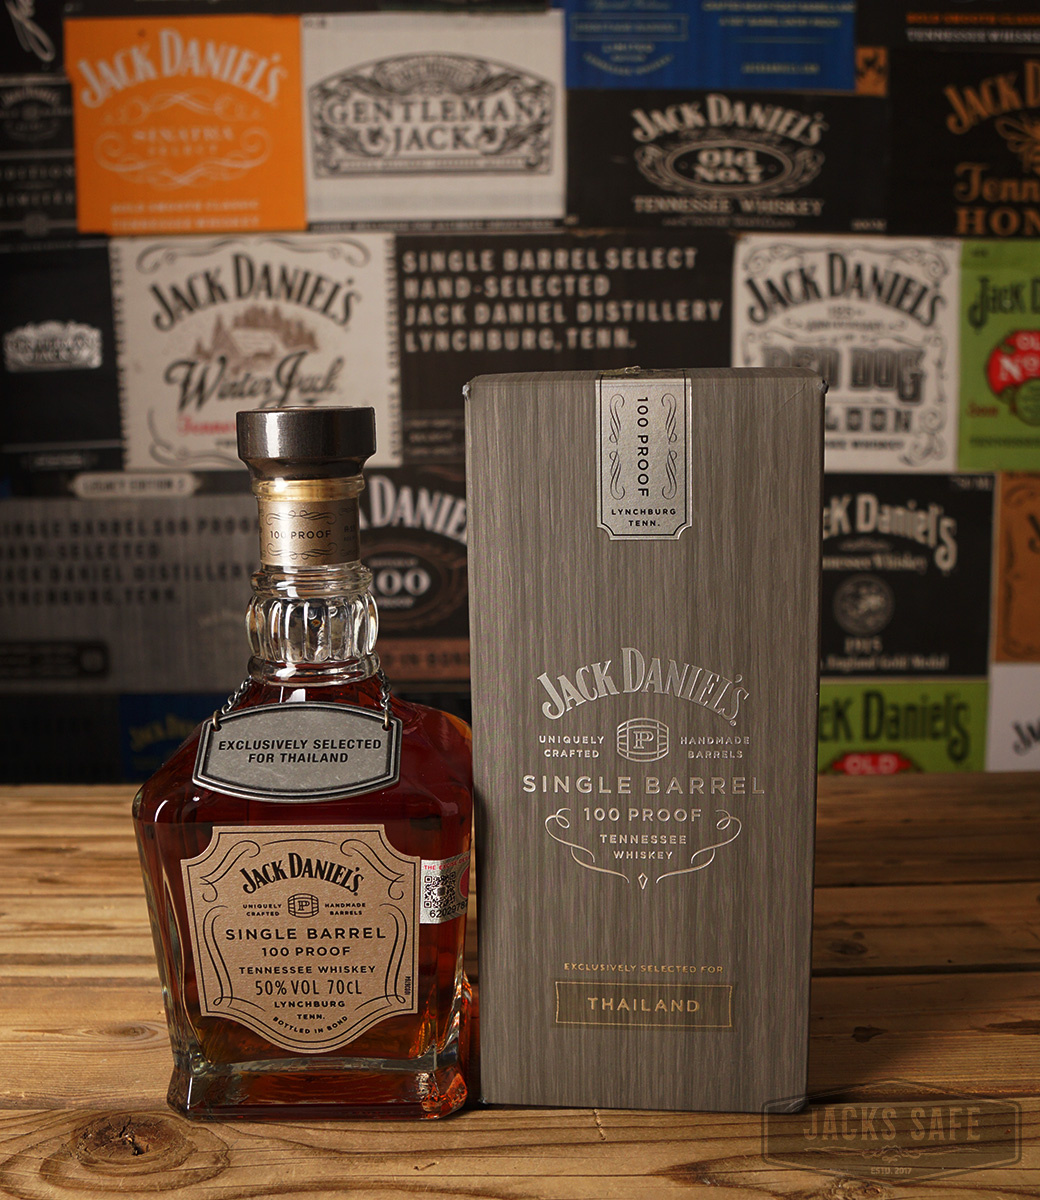 JACK DANIEL'S - Single Barrel - 100 Proof - PC - SELECTED FOR THAILAND - 700ML - TAG - 6.25.19